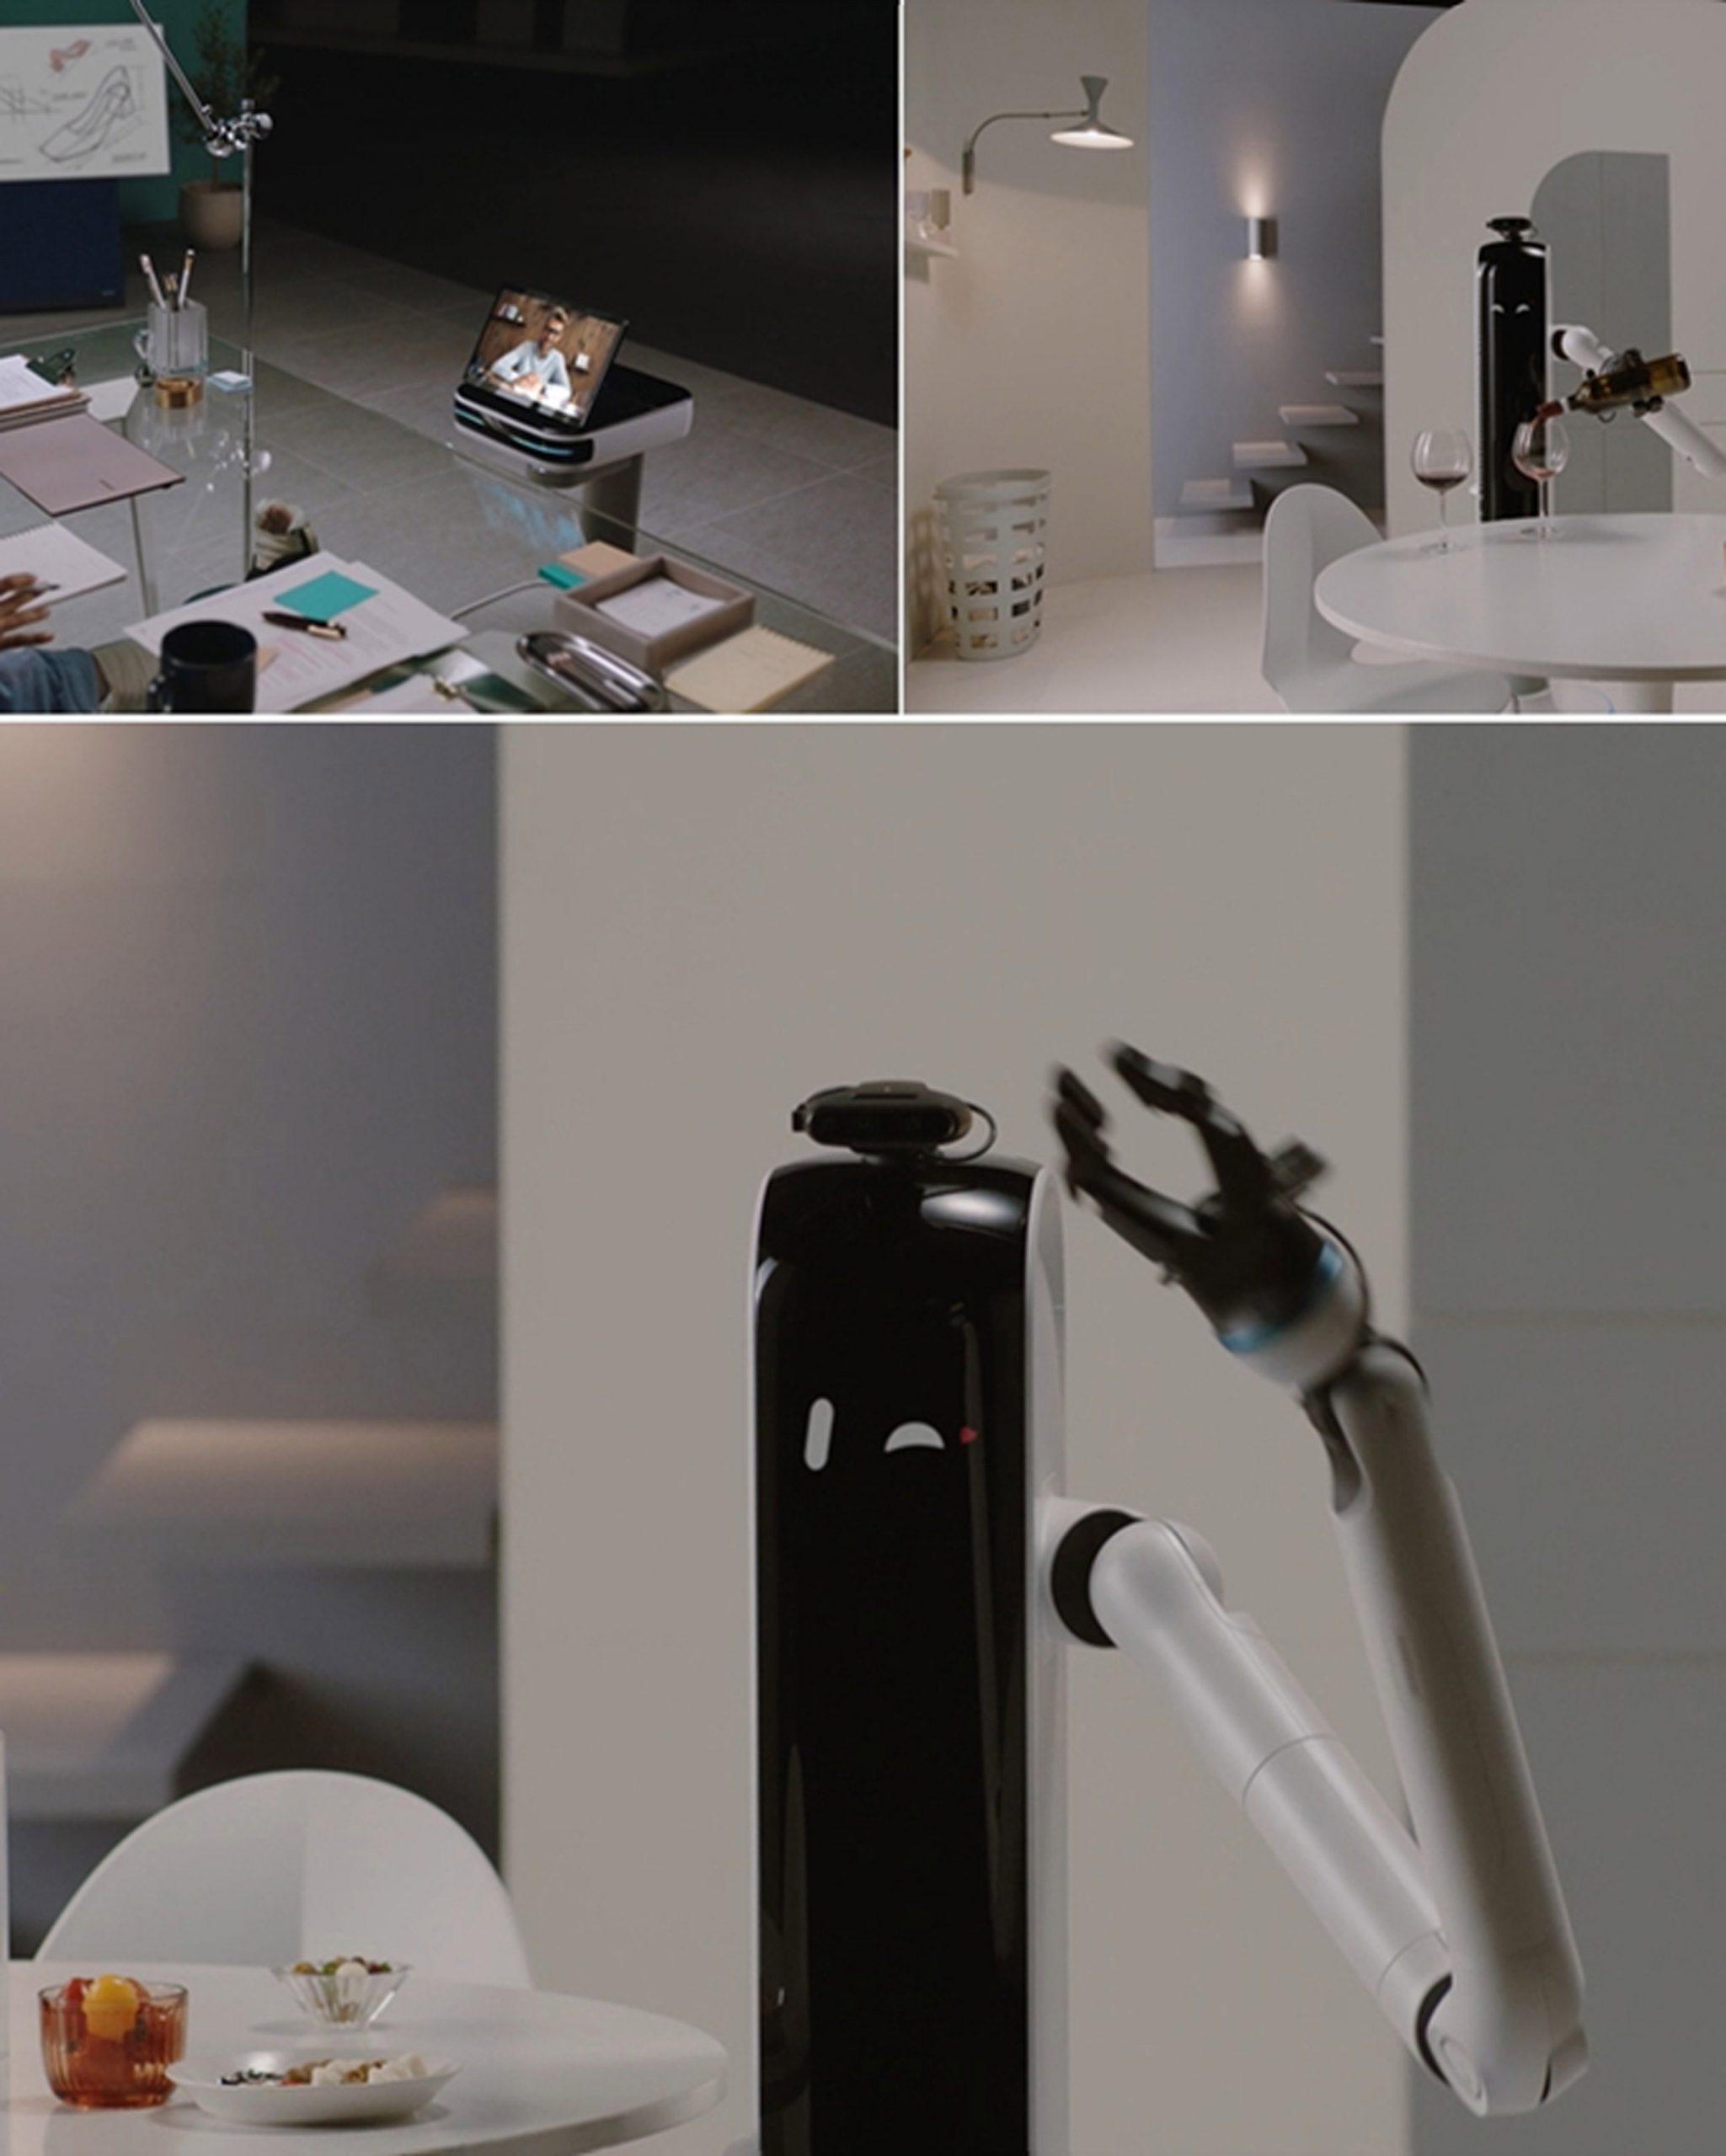 Bot Handy by Samsung assists you with your housework and can bring you a drink, from CES 2021